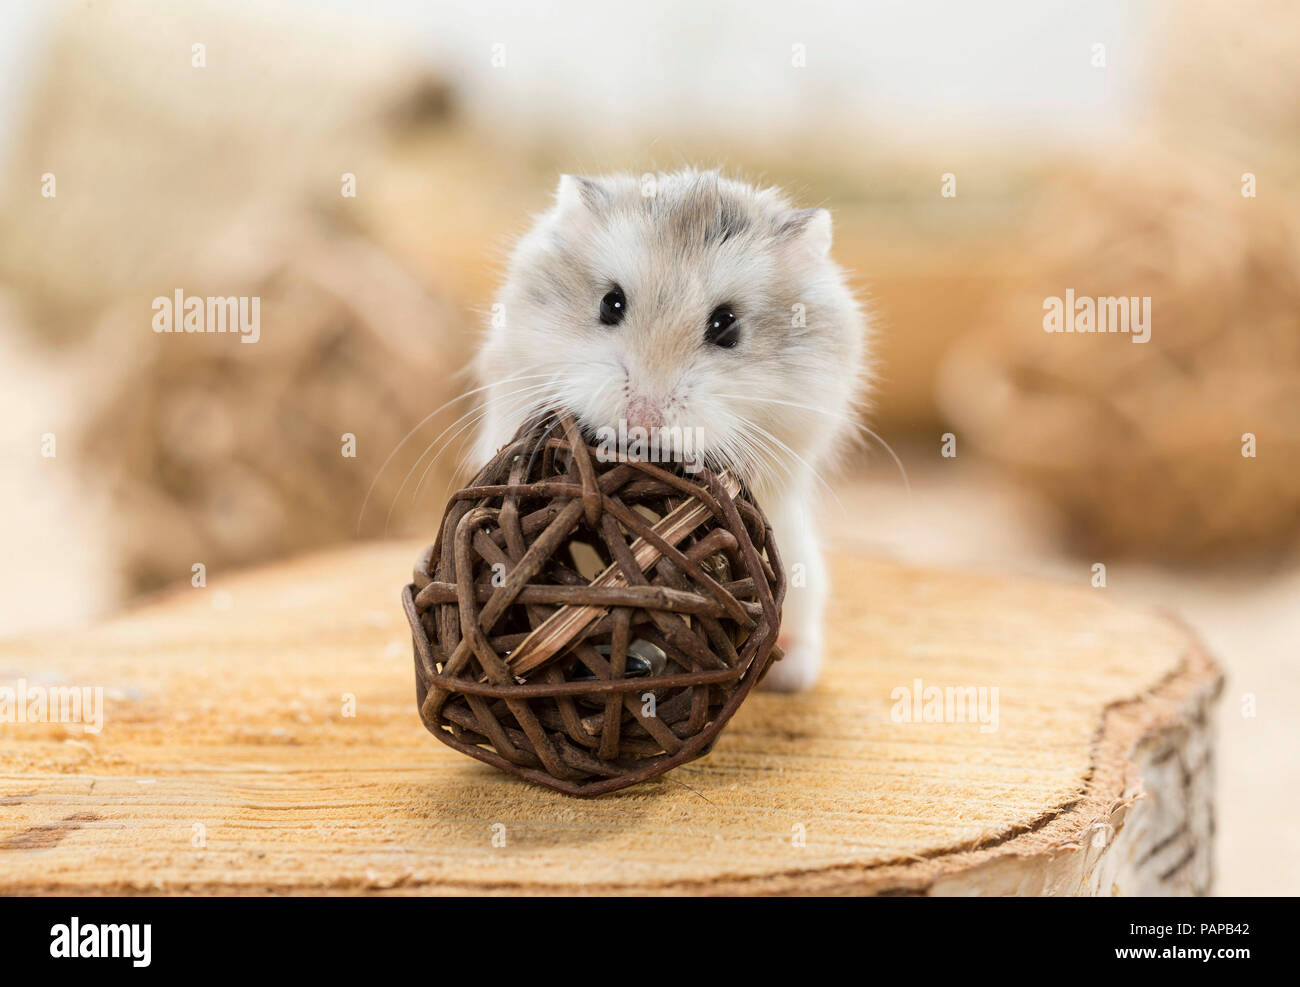 Roborovski Hamster (Phodopus roborovskii) with ball, which spends food when rolled. Germany Stock Photo